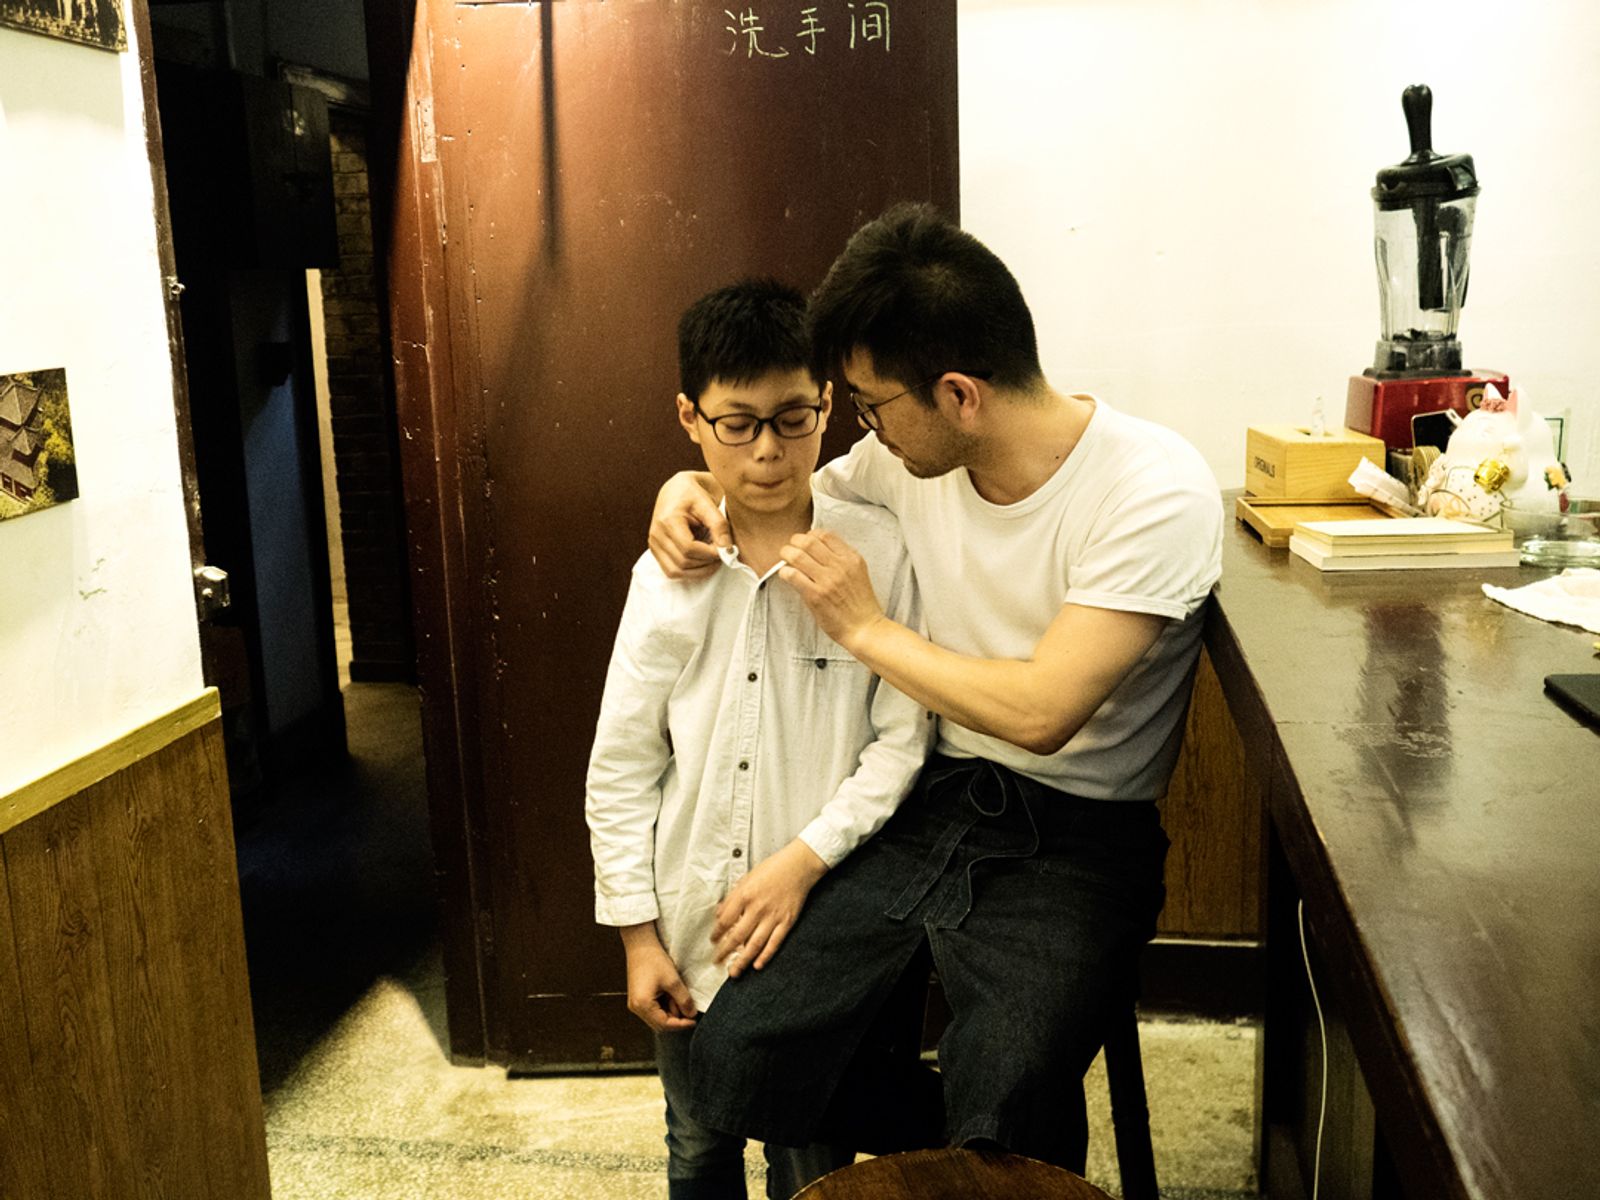 © Raul Ariano - Image from the LGBT in China photography project